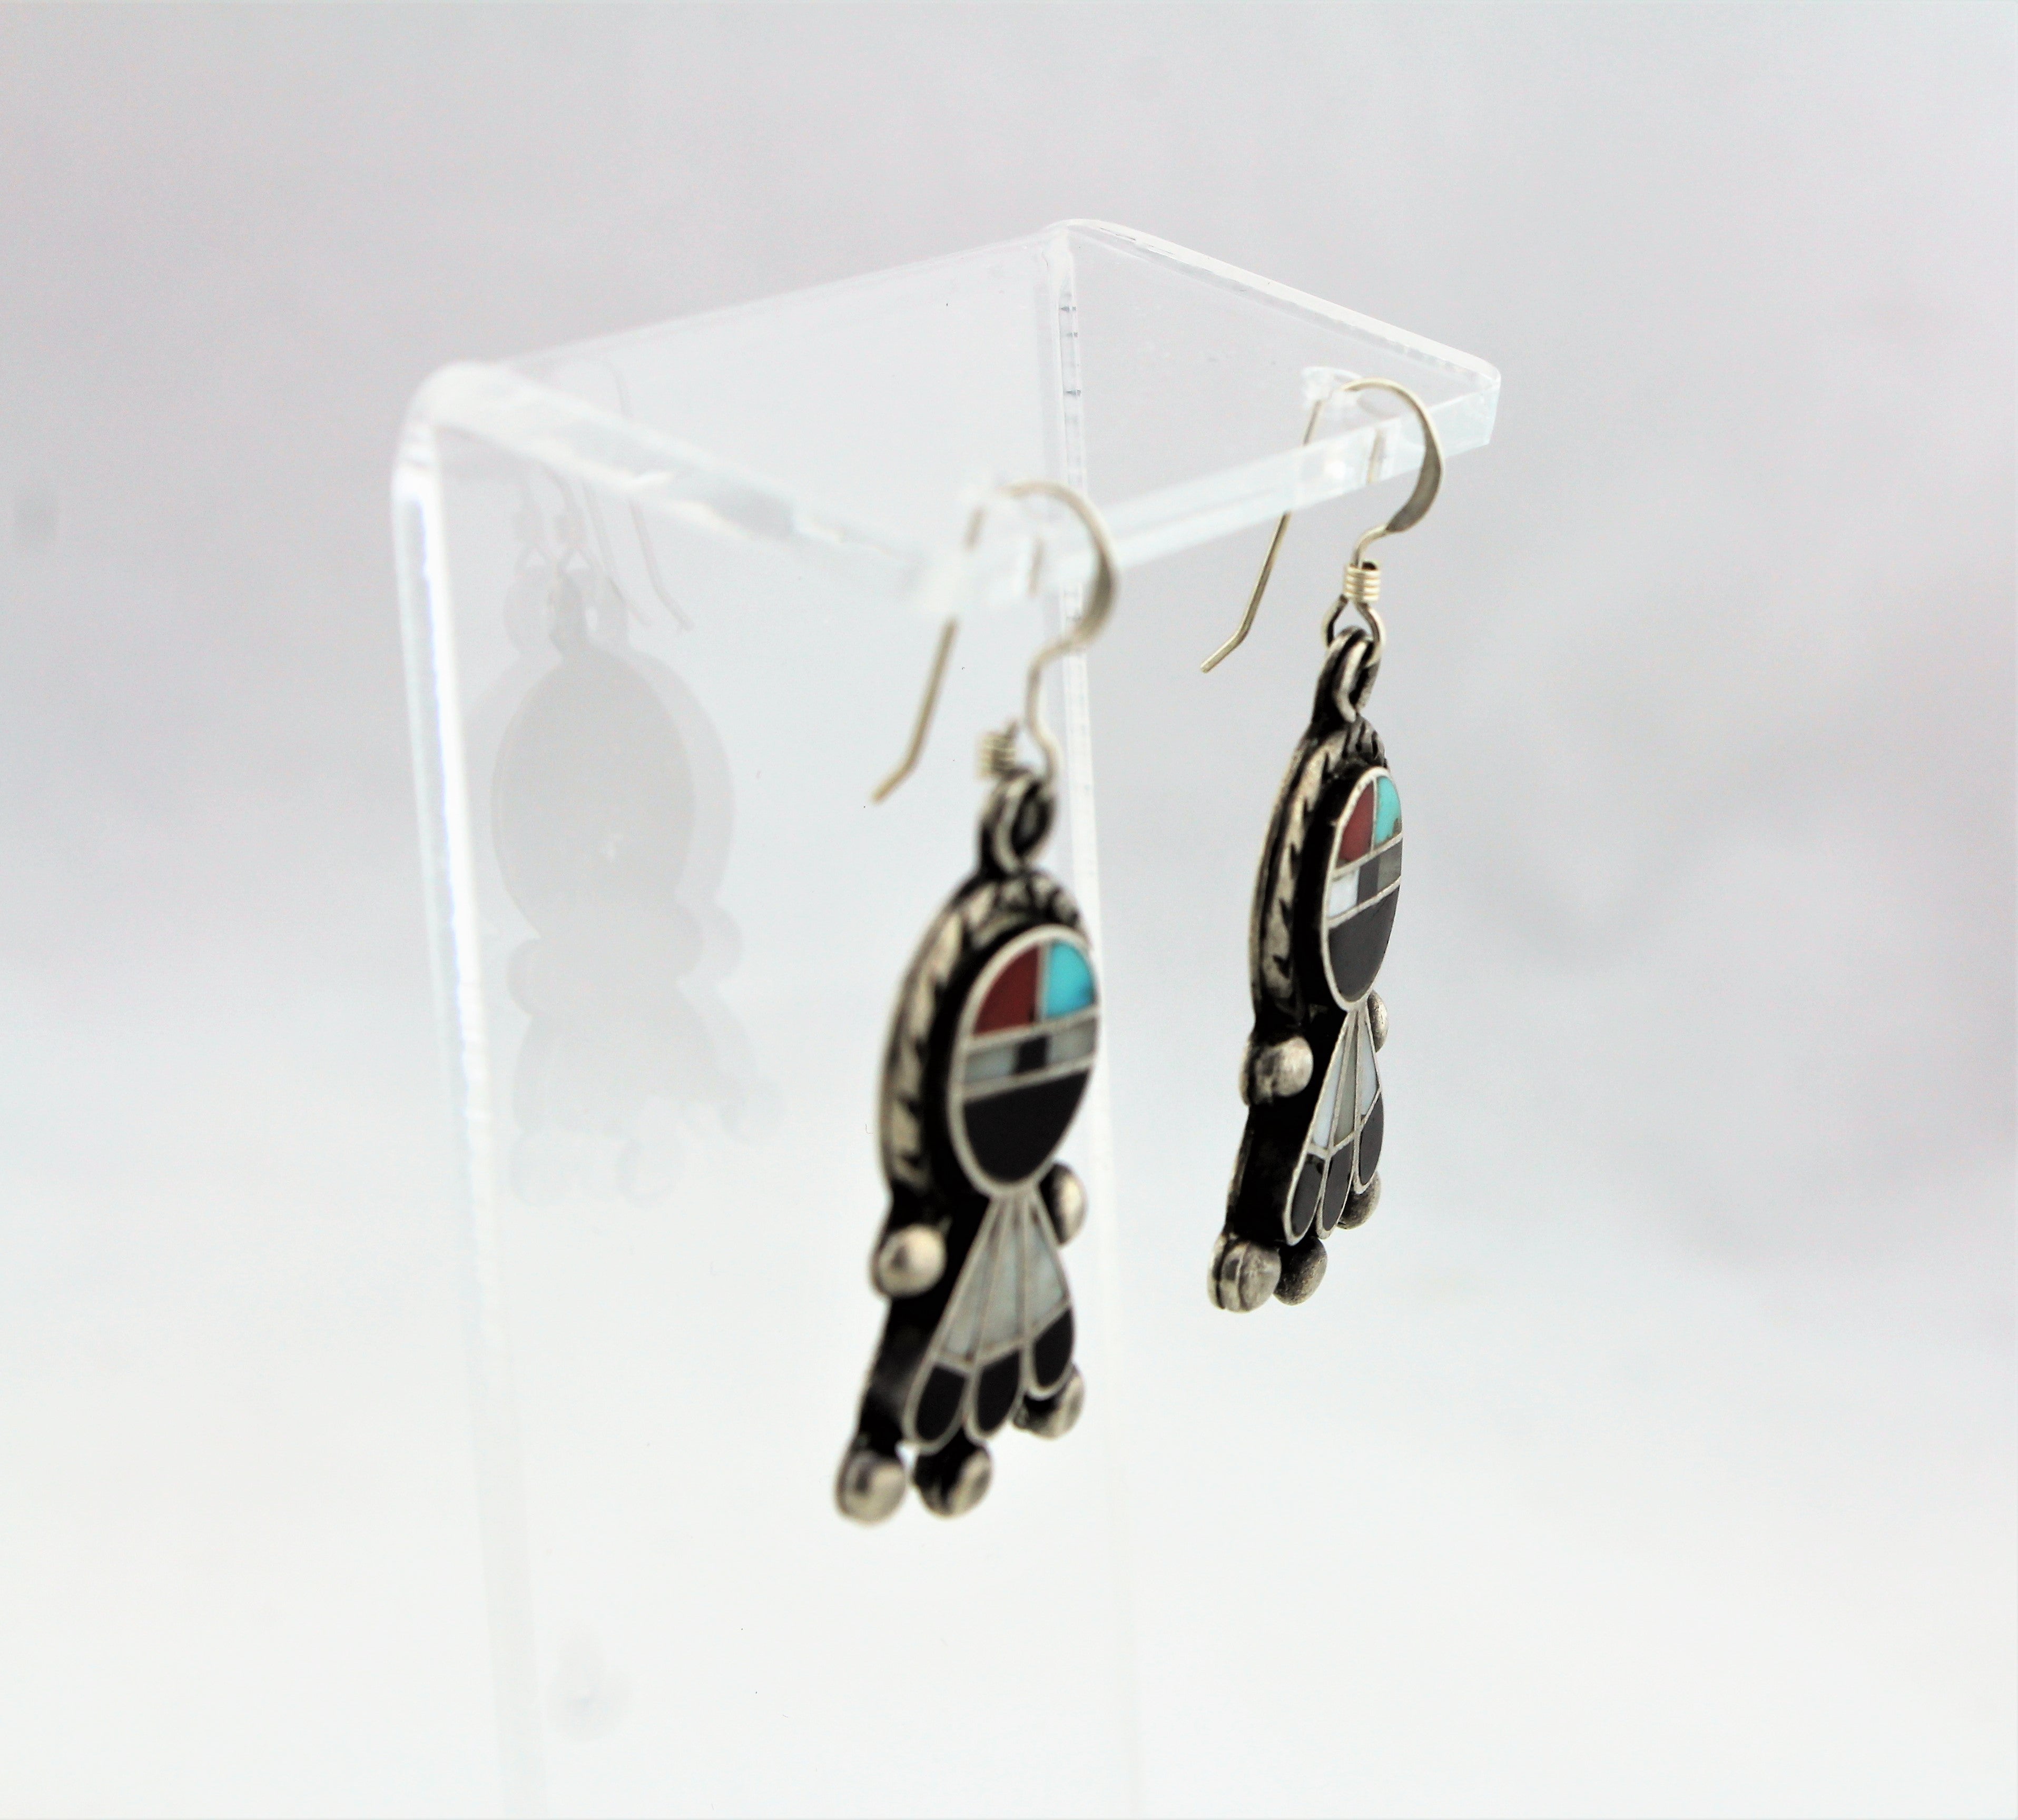 1930s Zuni Face with Raindrops Earrings